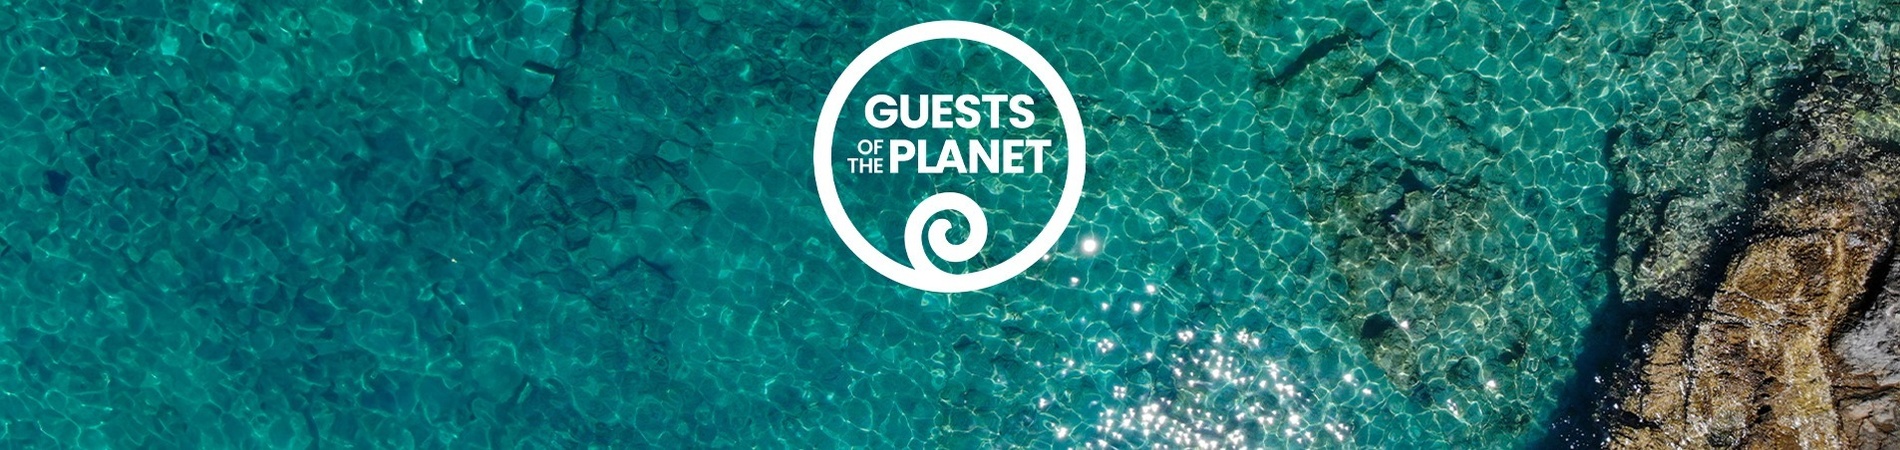 an aerial view of a body of water with a guests of the planet logo